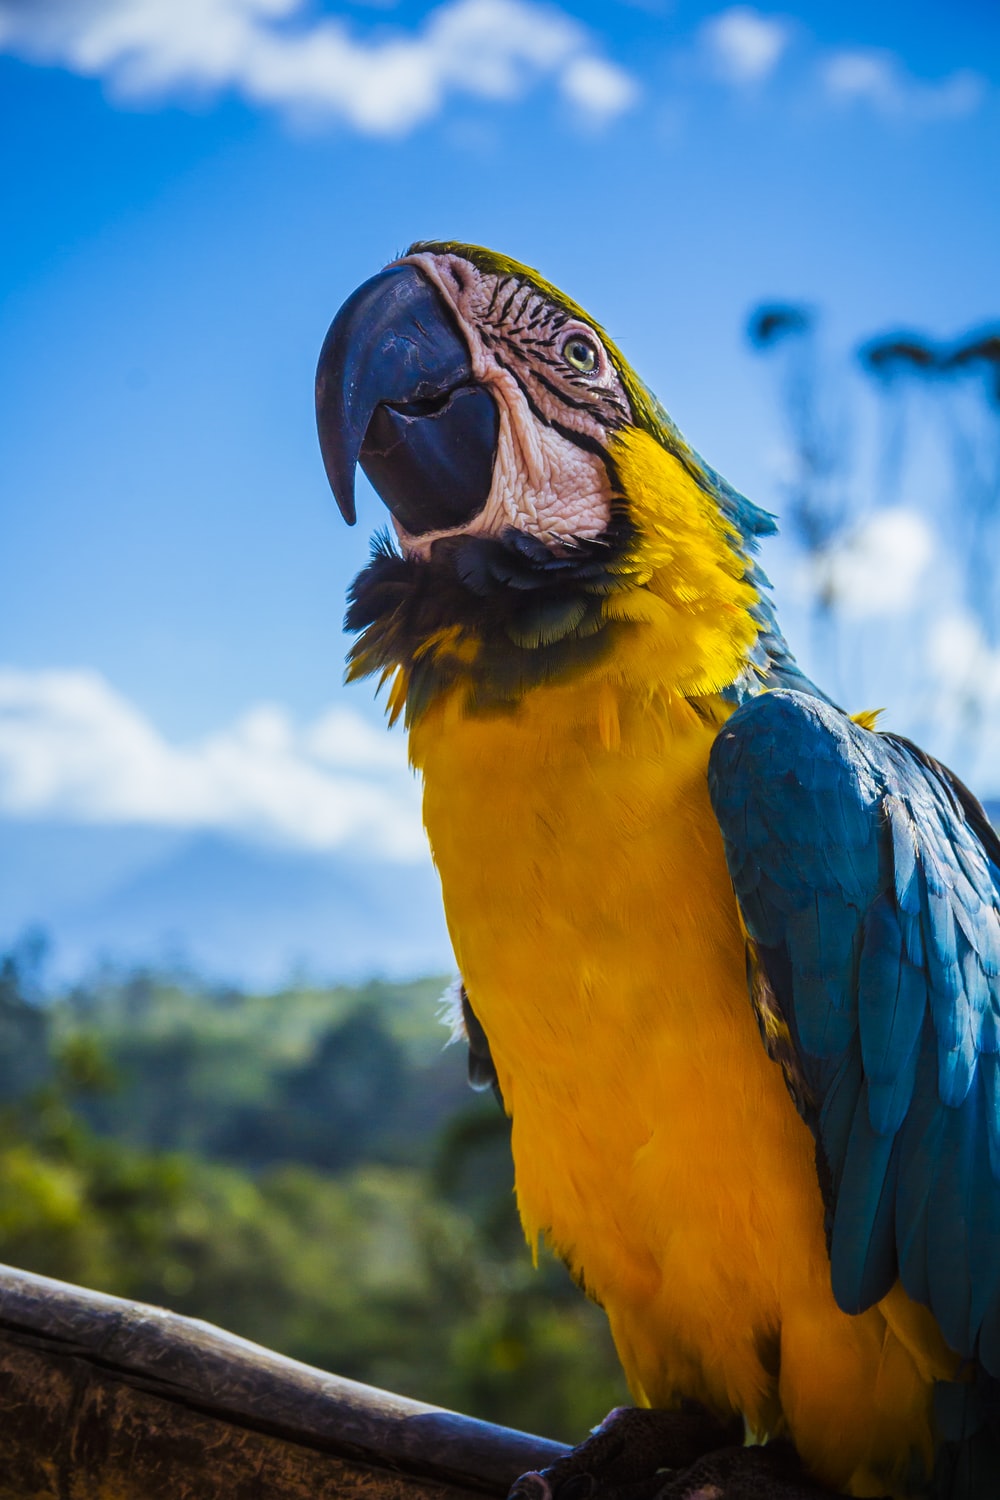 Tropical Bird Picture. Download Free Image